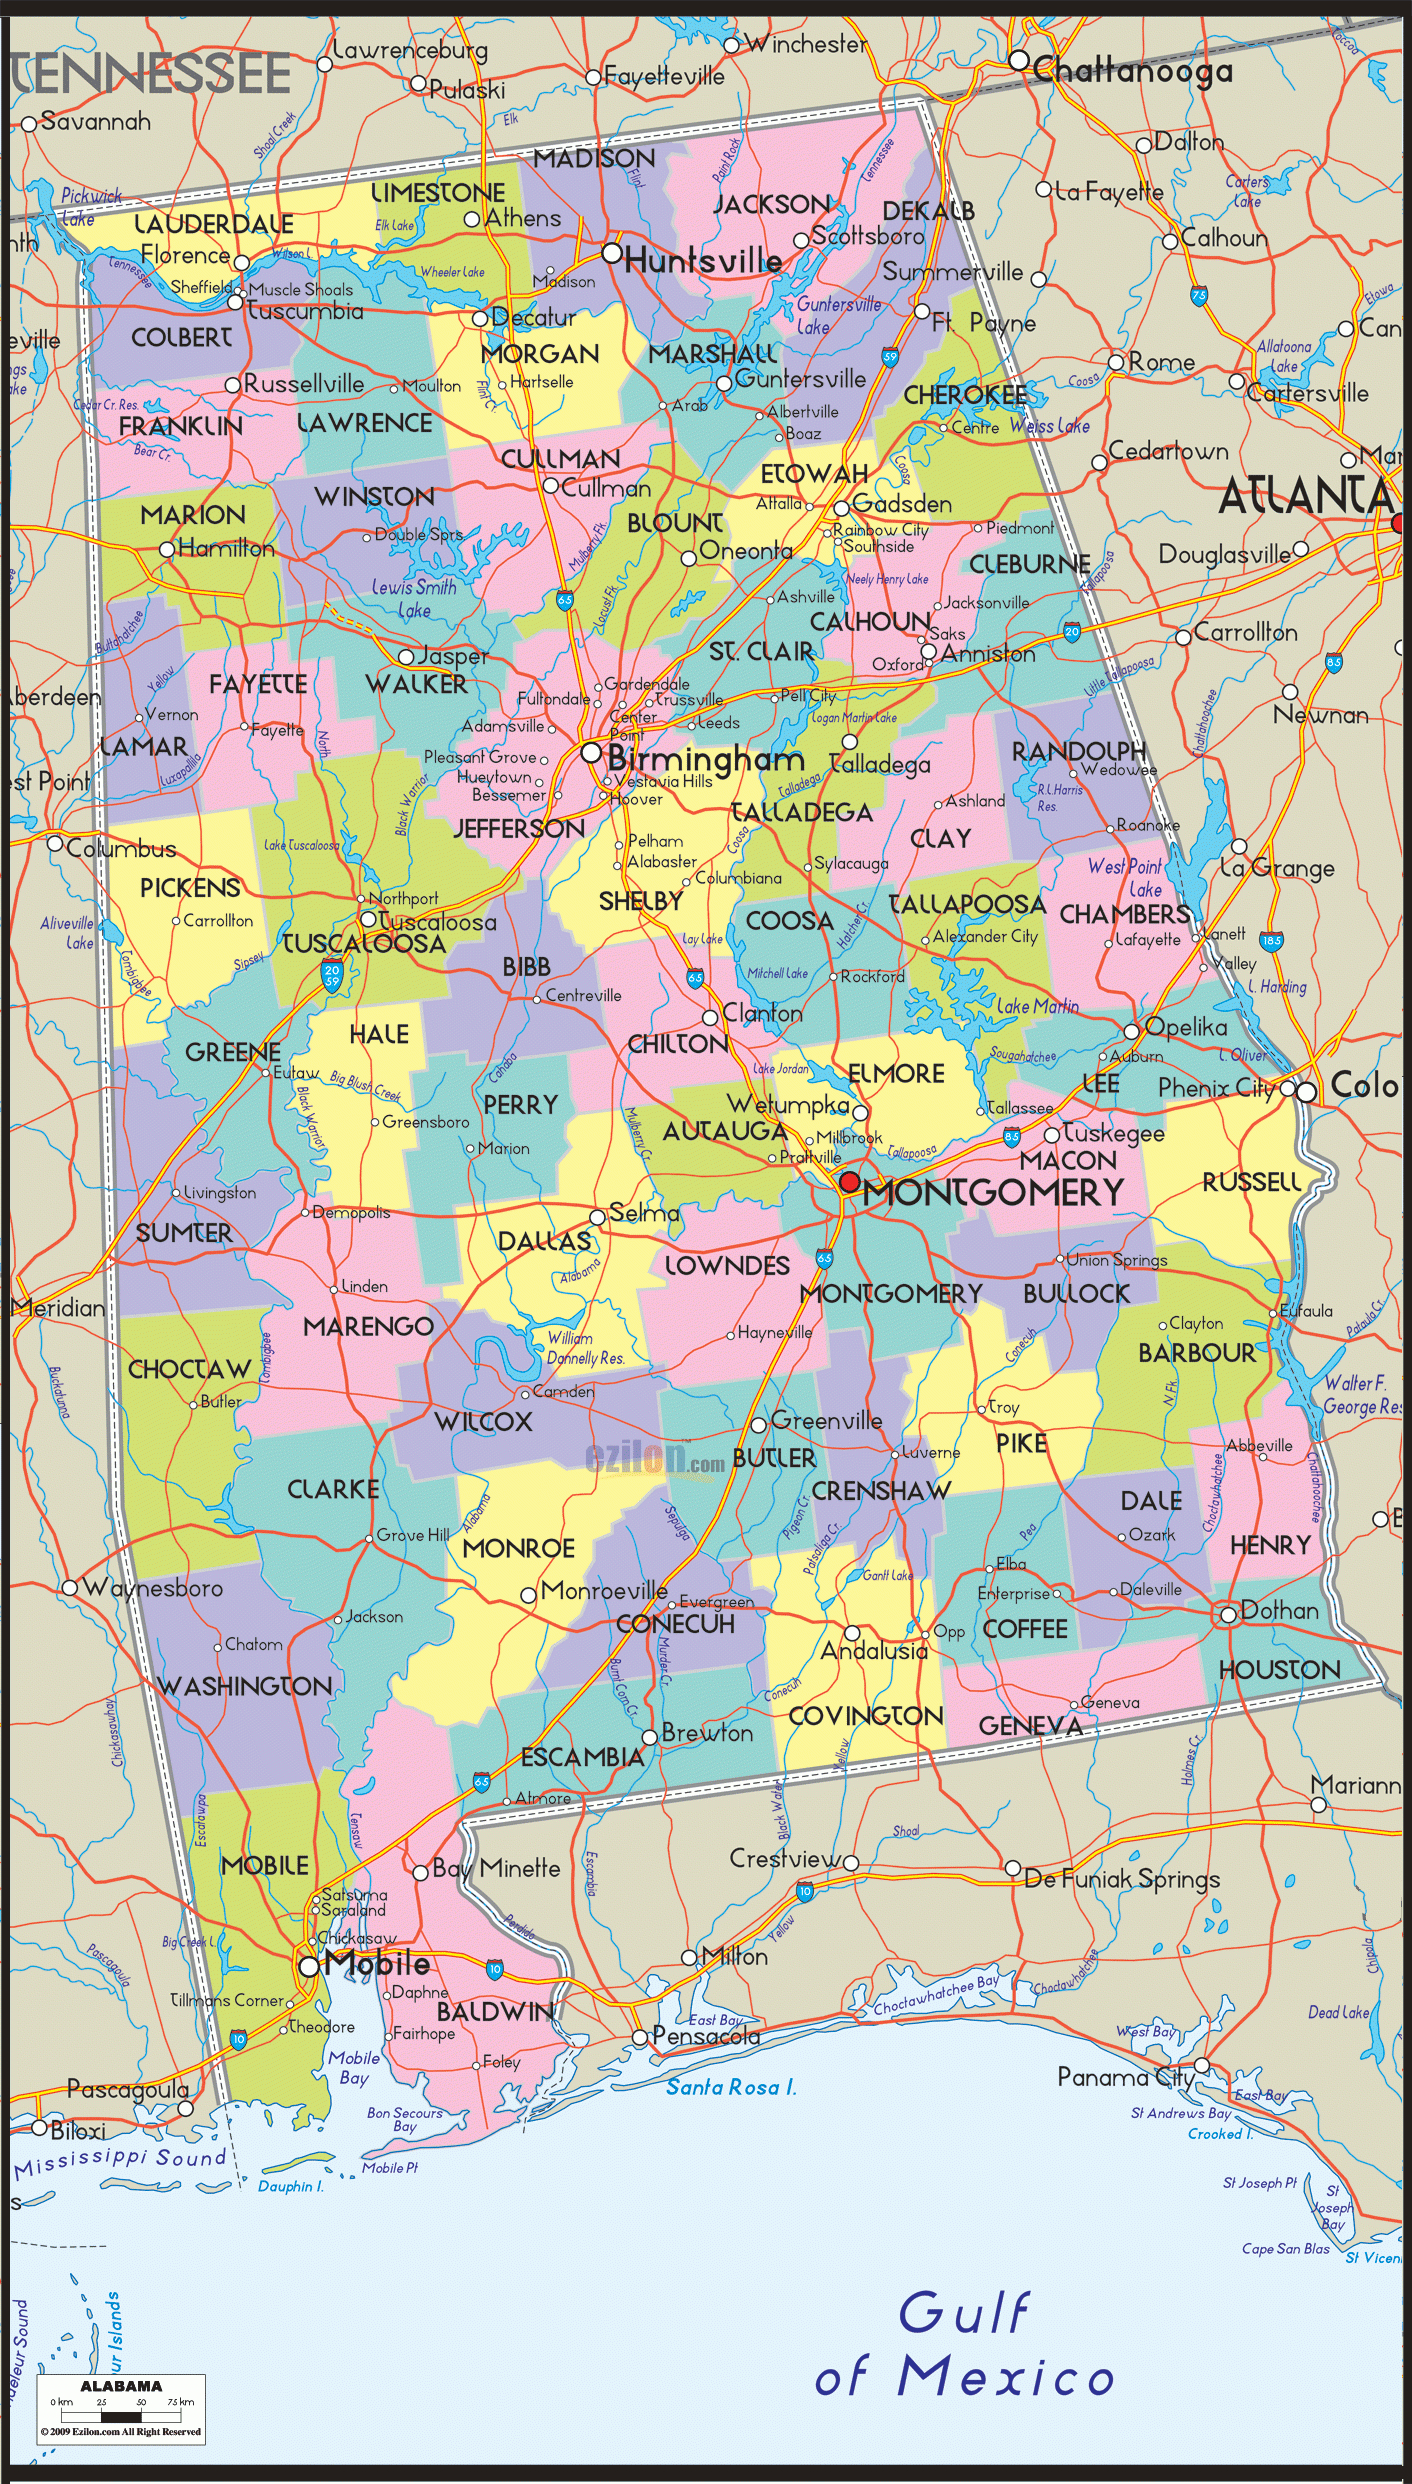 Map Of Alabama - Includes City, Towns And Counties. | United States - Alabama Florida Coast Map